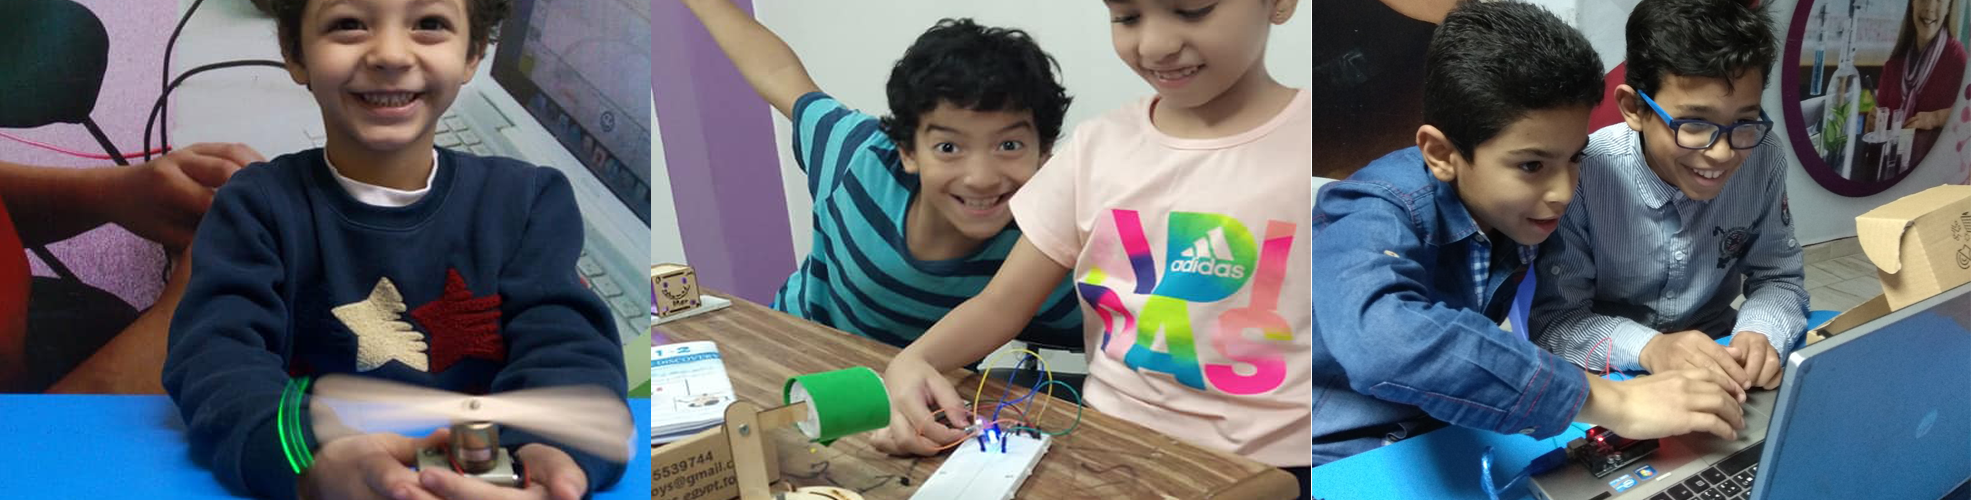 Involves Scientific Inquiry and the Engineering Design Process, which allows children to create ingenious inventions